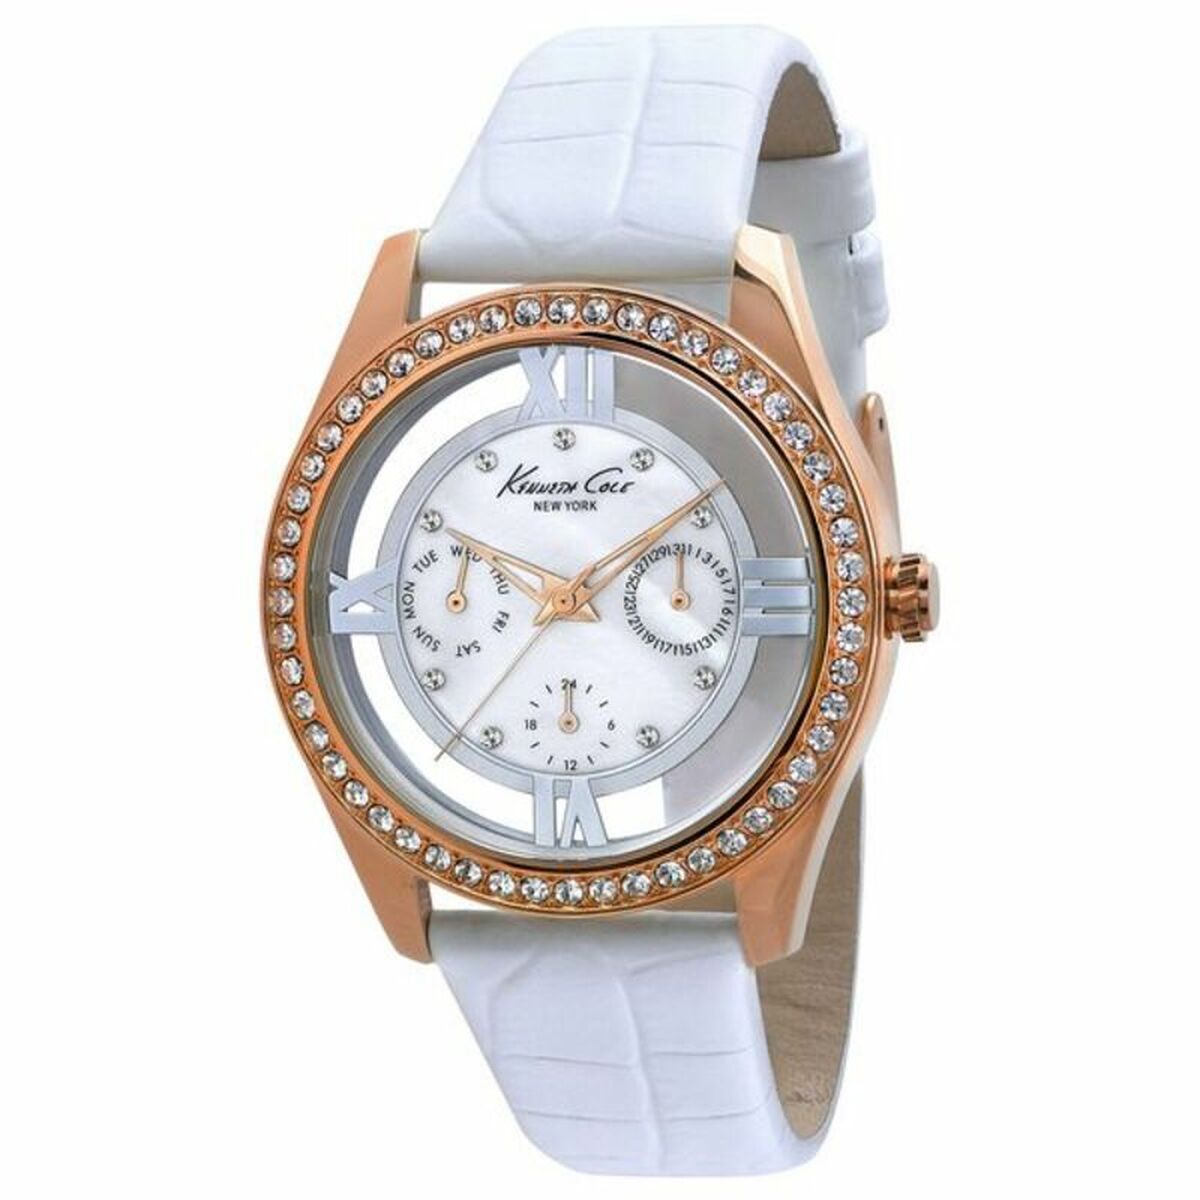 Ladies'Watch Kenneth Cole IKC2794 (Ø 40 mm), Kenneth Cole, Watches, Women, ladieswatch-kenneth-cole-ikc2794-o-40-mm, : Quartz Movement, :Gold, Brand_Kenneth Cole, category-reference-2570, category-reference-2635, category-reference-2995, category-reference-t-19667, category-reference-t-19725, Condition_NEW, fashion, gifts for women, original gifts, Price_50 - 100, RiotNook